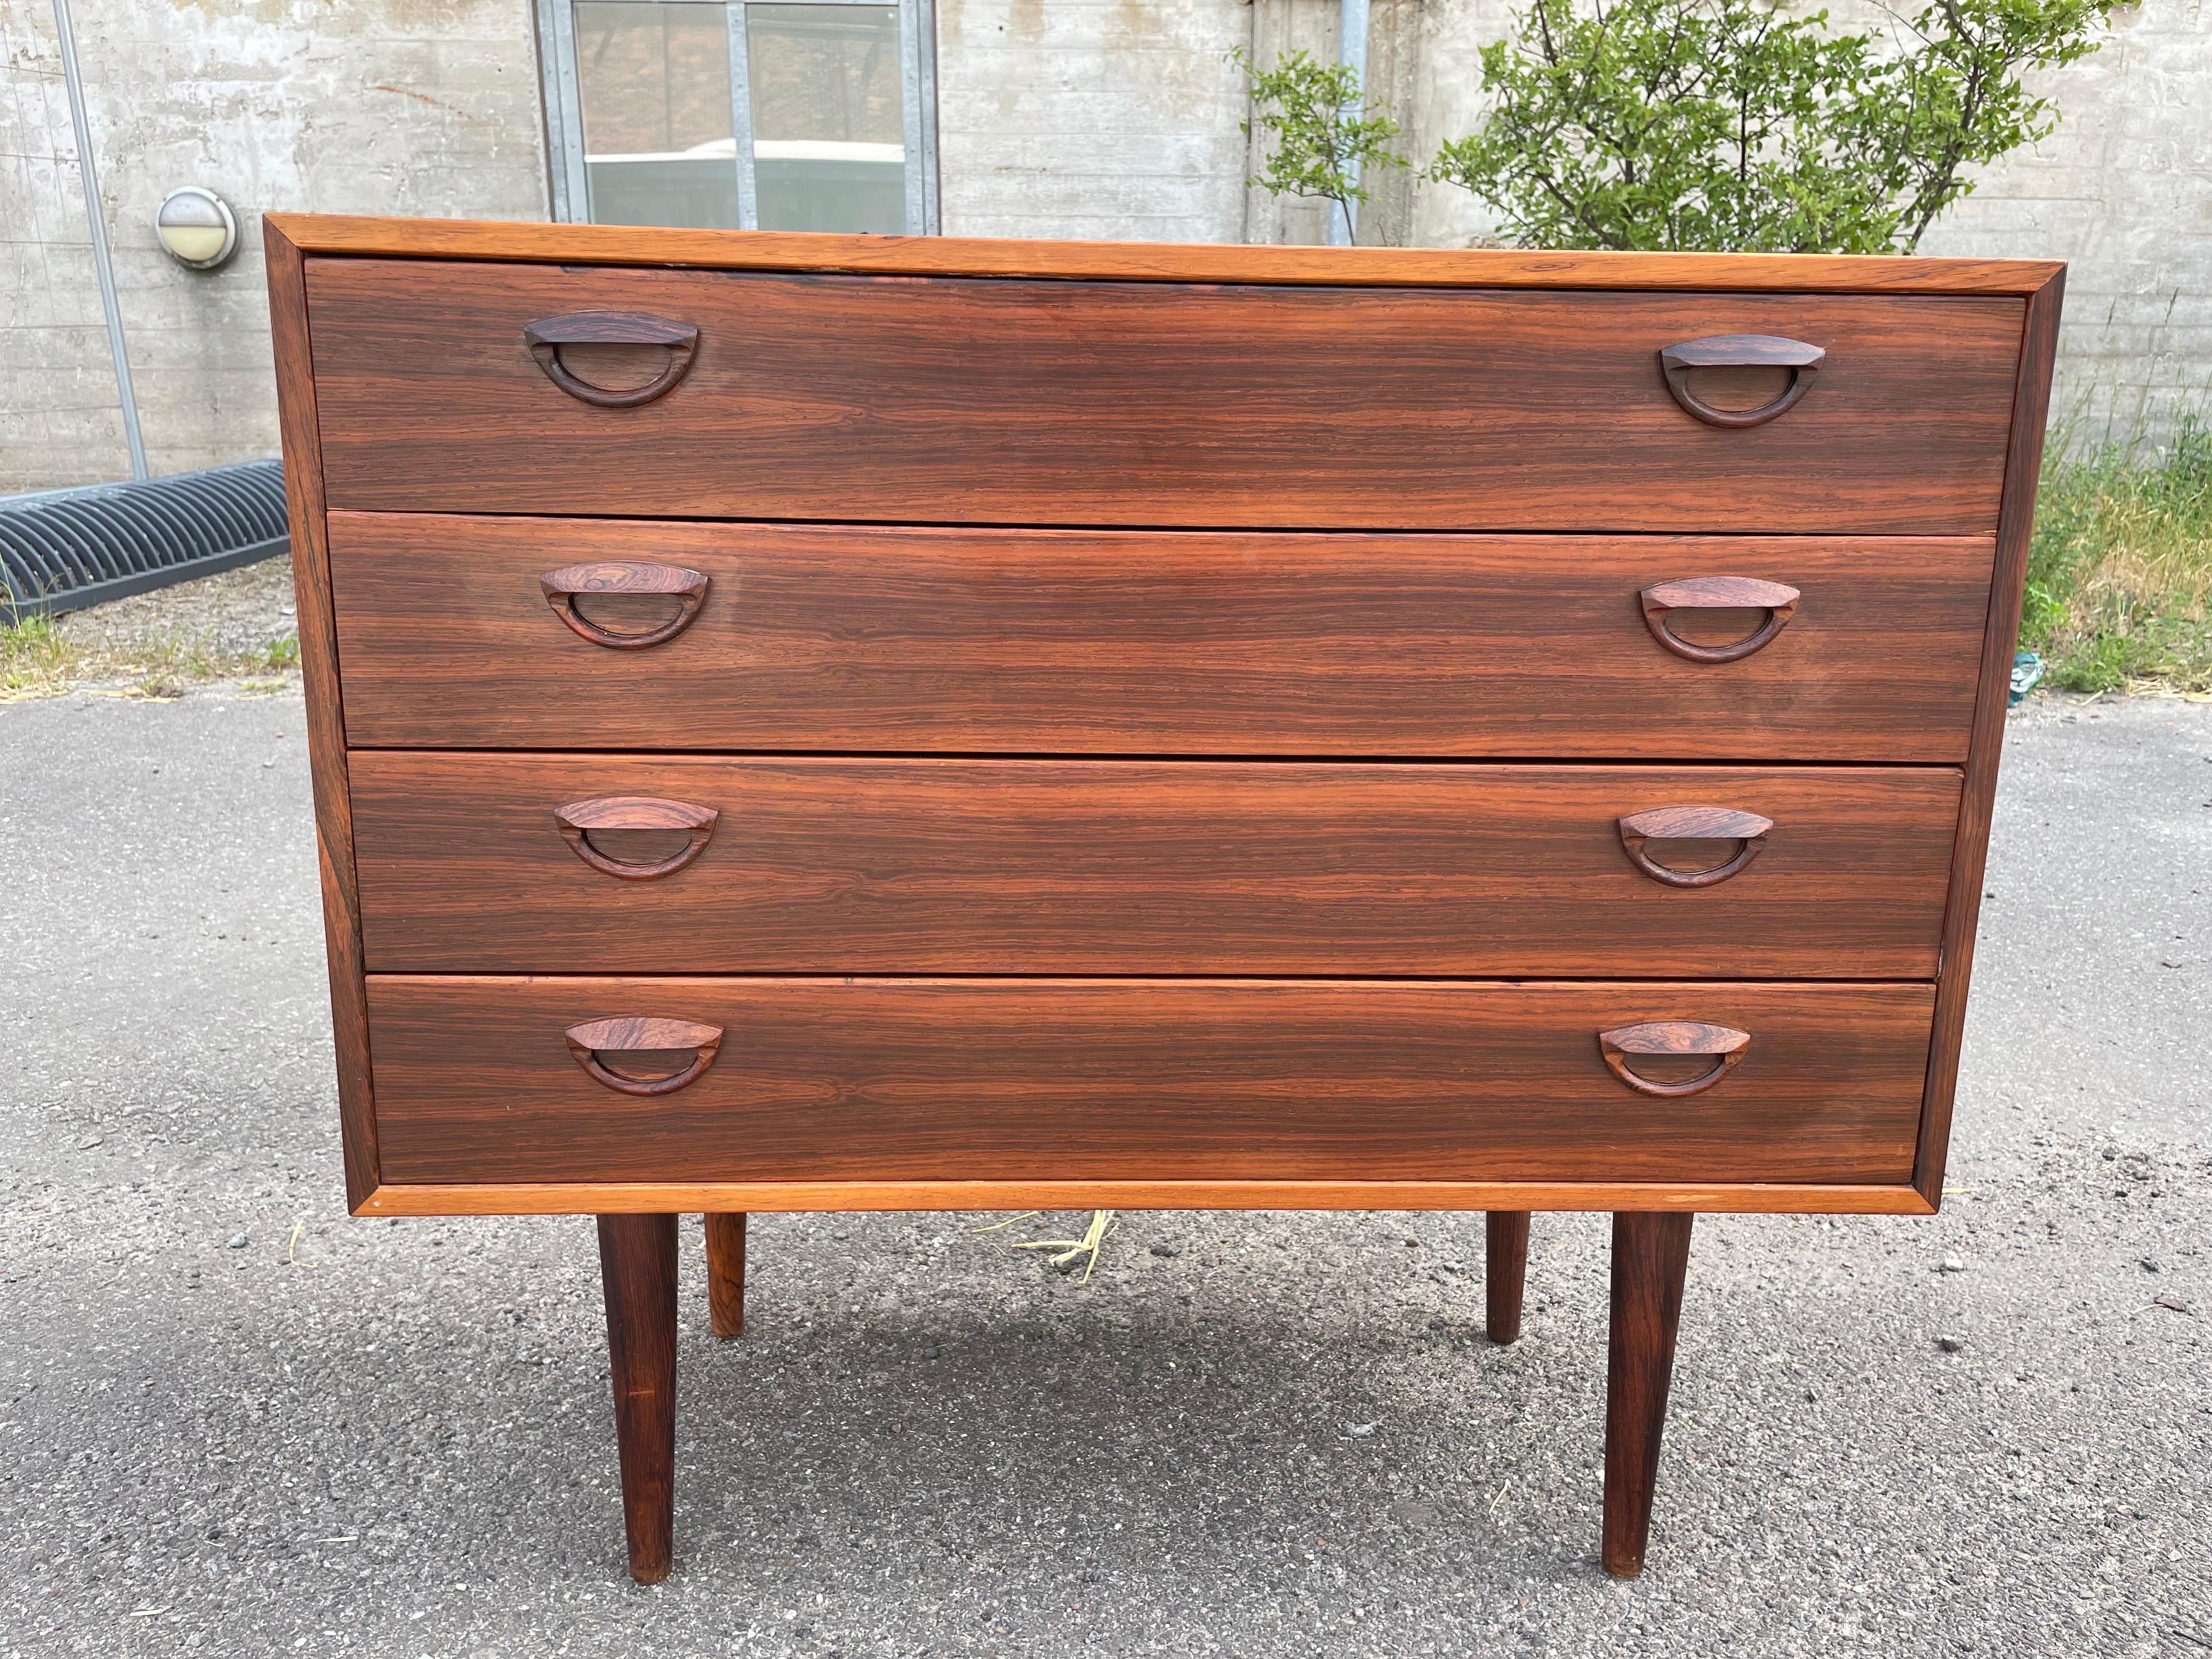 Wood Beautiful Danish Midcentury Chest of Drawers by Kai Kristiansen 1960s For Sale